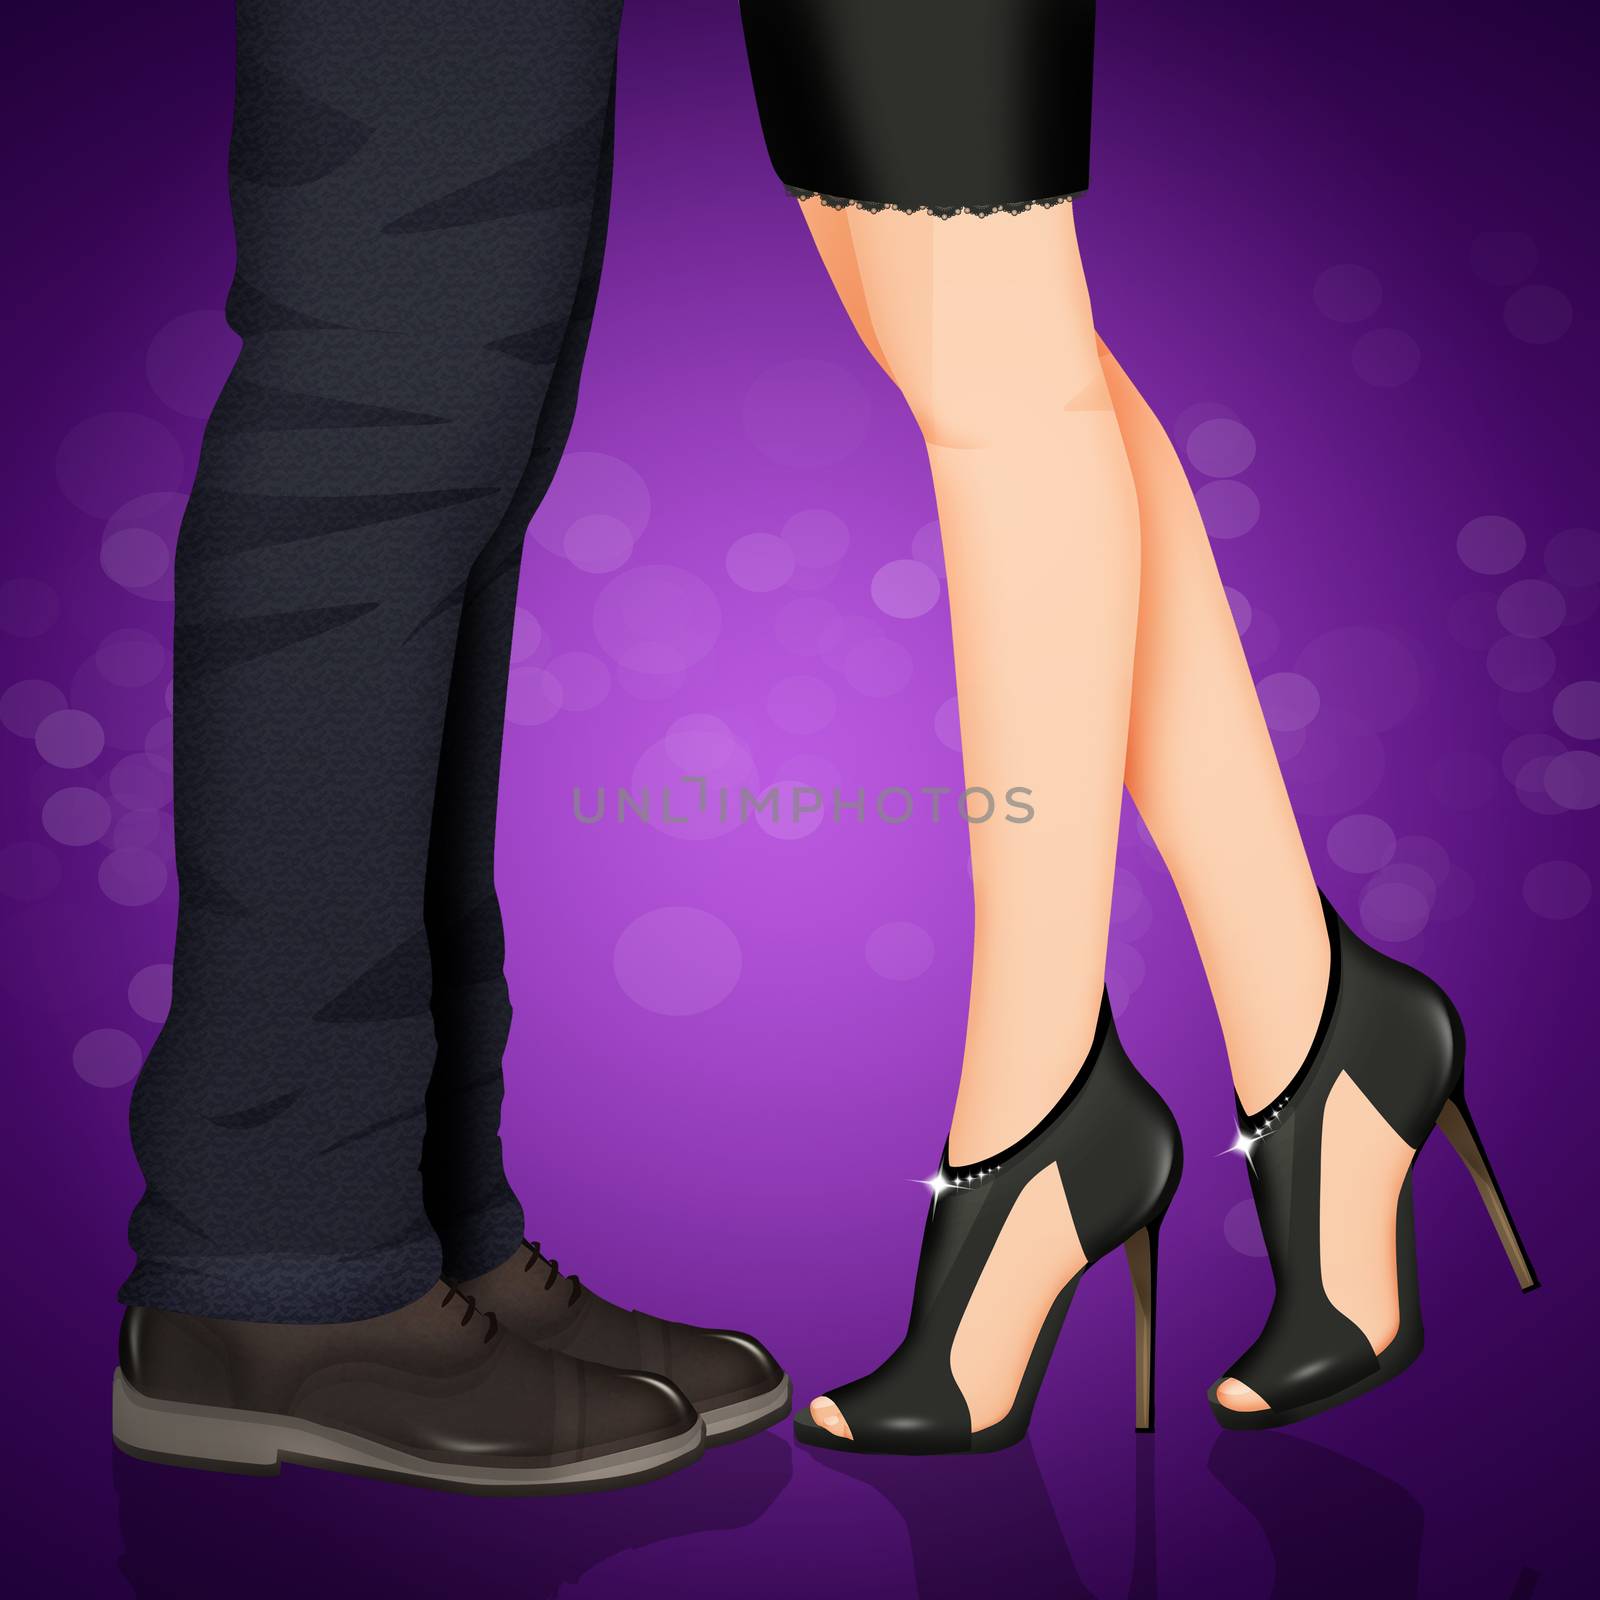 legs of man and woman with elegant shoes by adrenalina